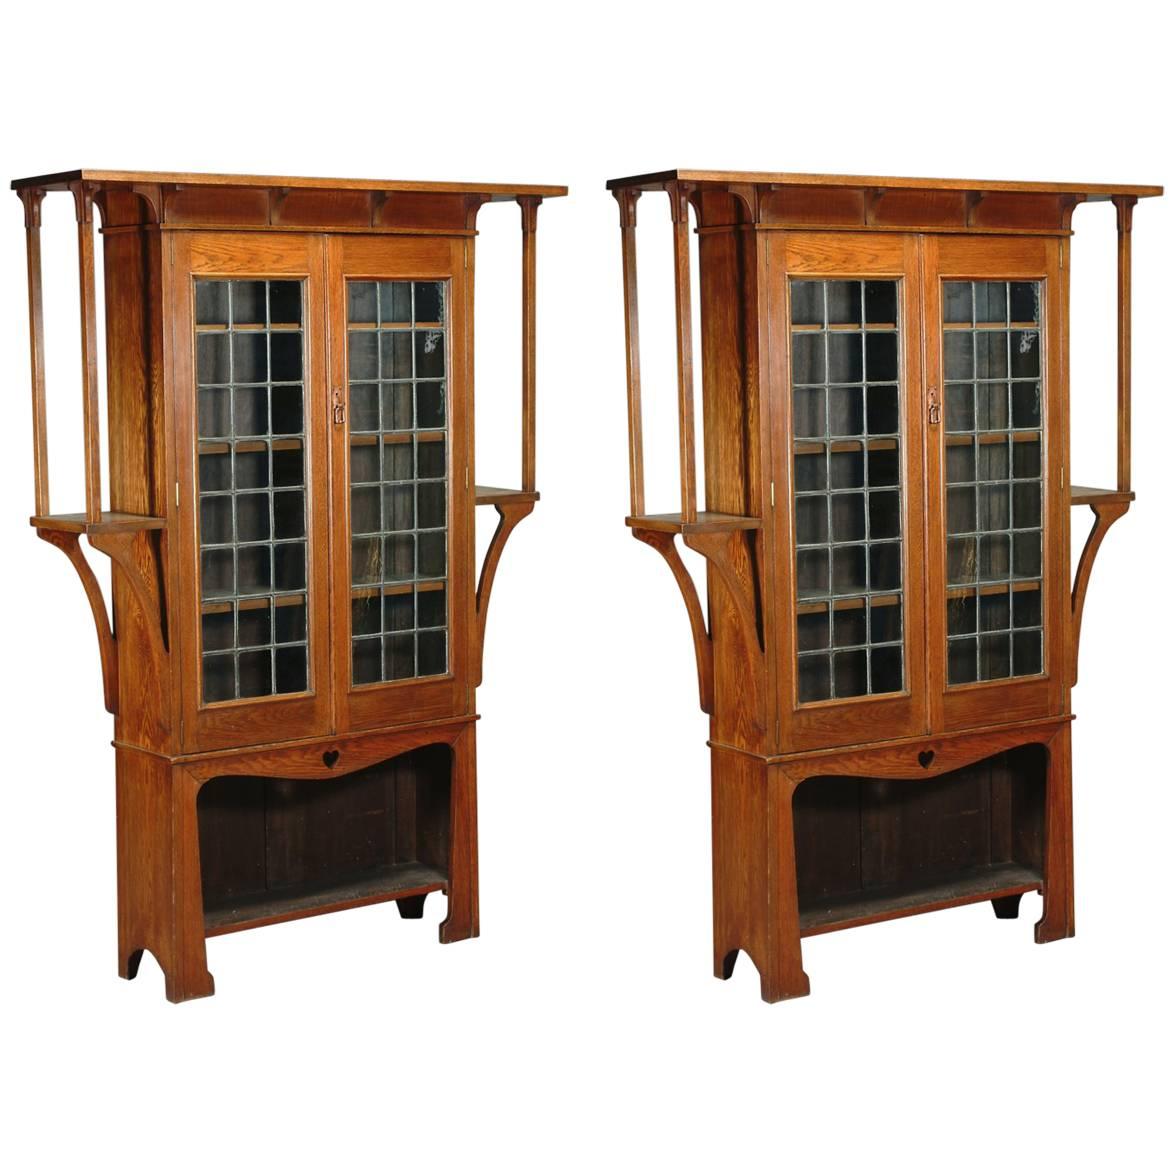 Near Pair of Oak Arts & Crafts Bookcases by Liberty and Co.